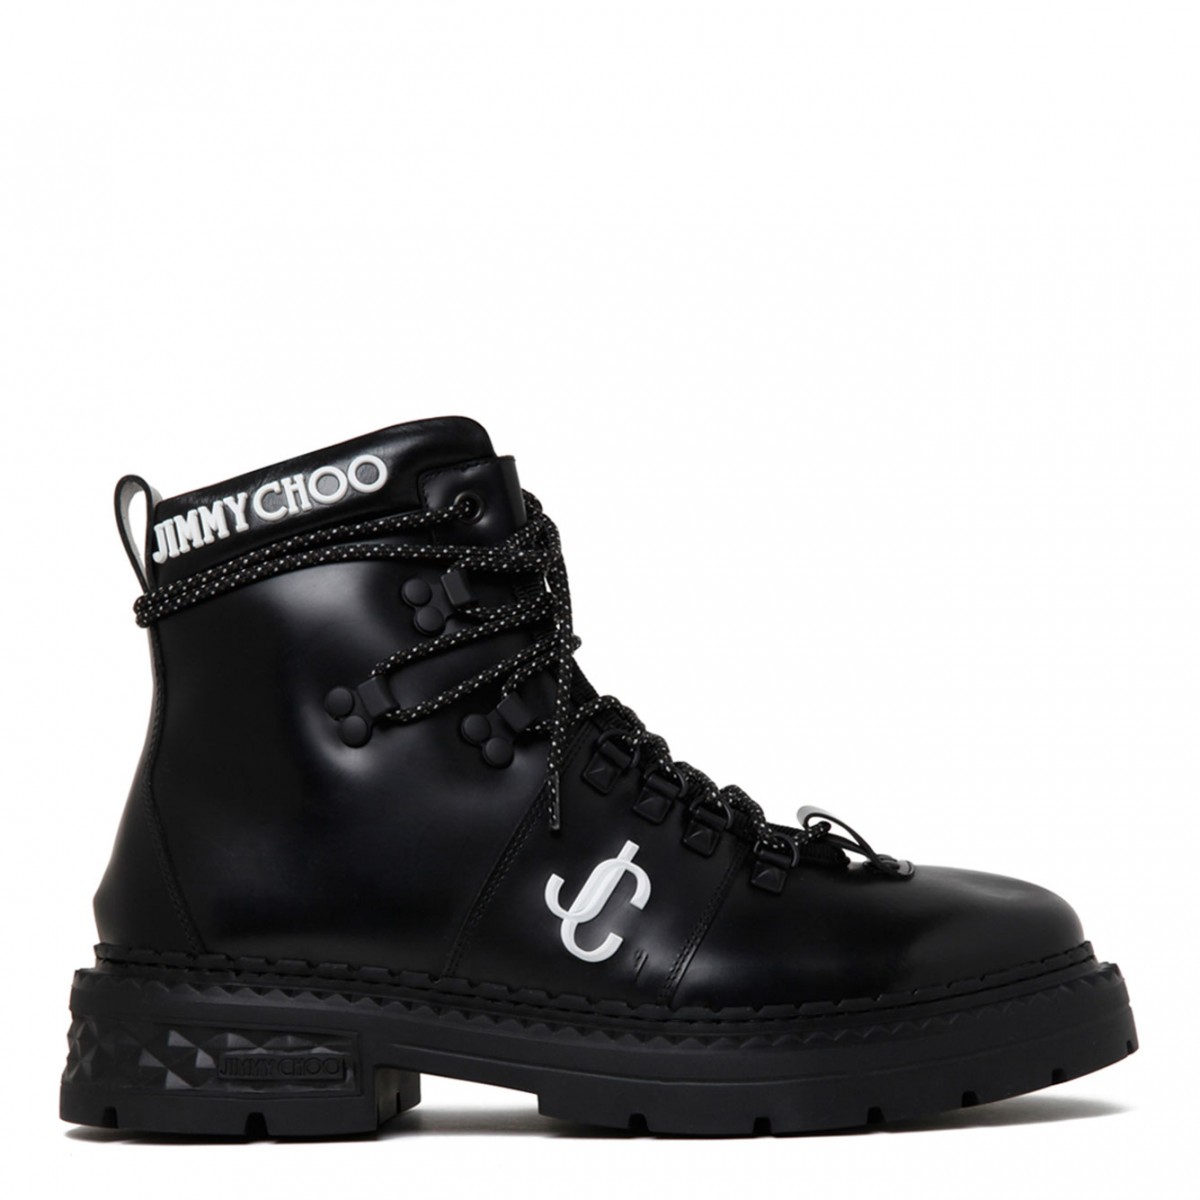 Black and White Marlow Hiking Boots